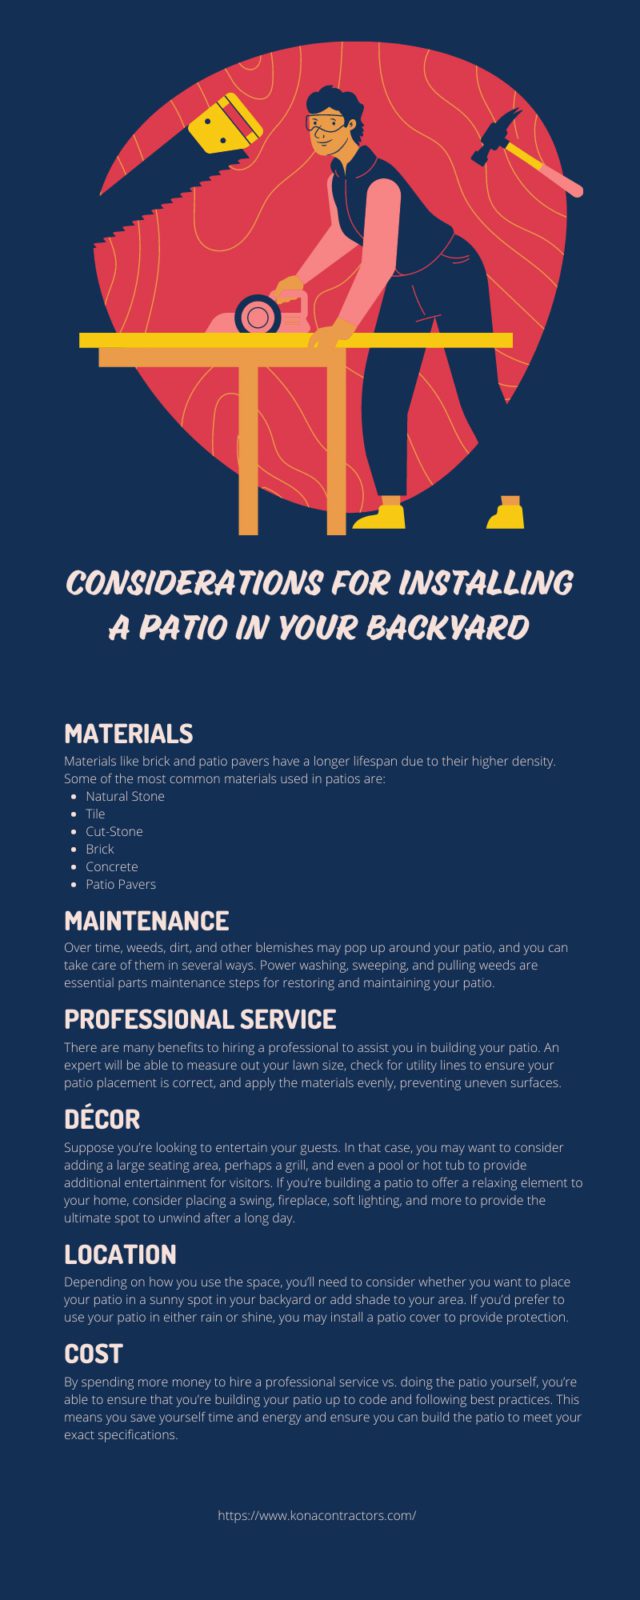 Considerations for Installing a Patio in Your Backyard